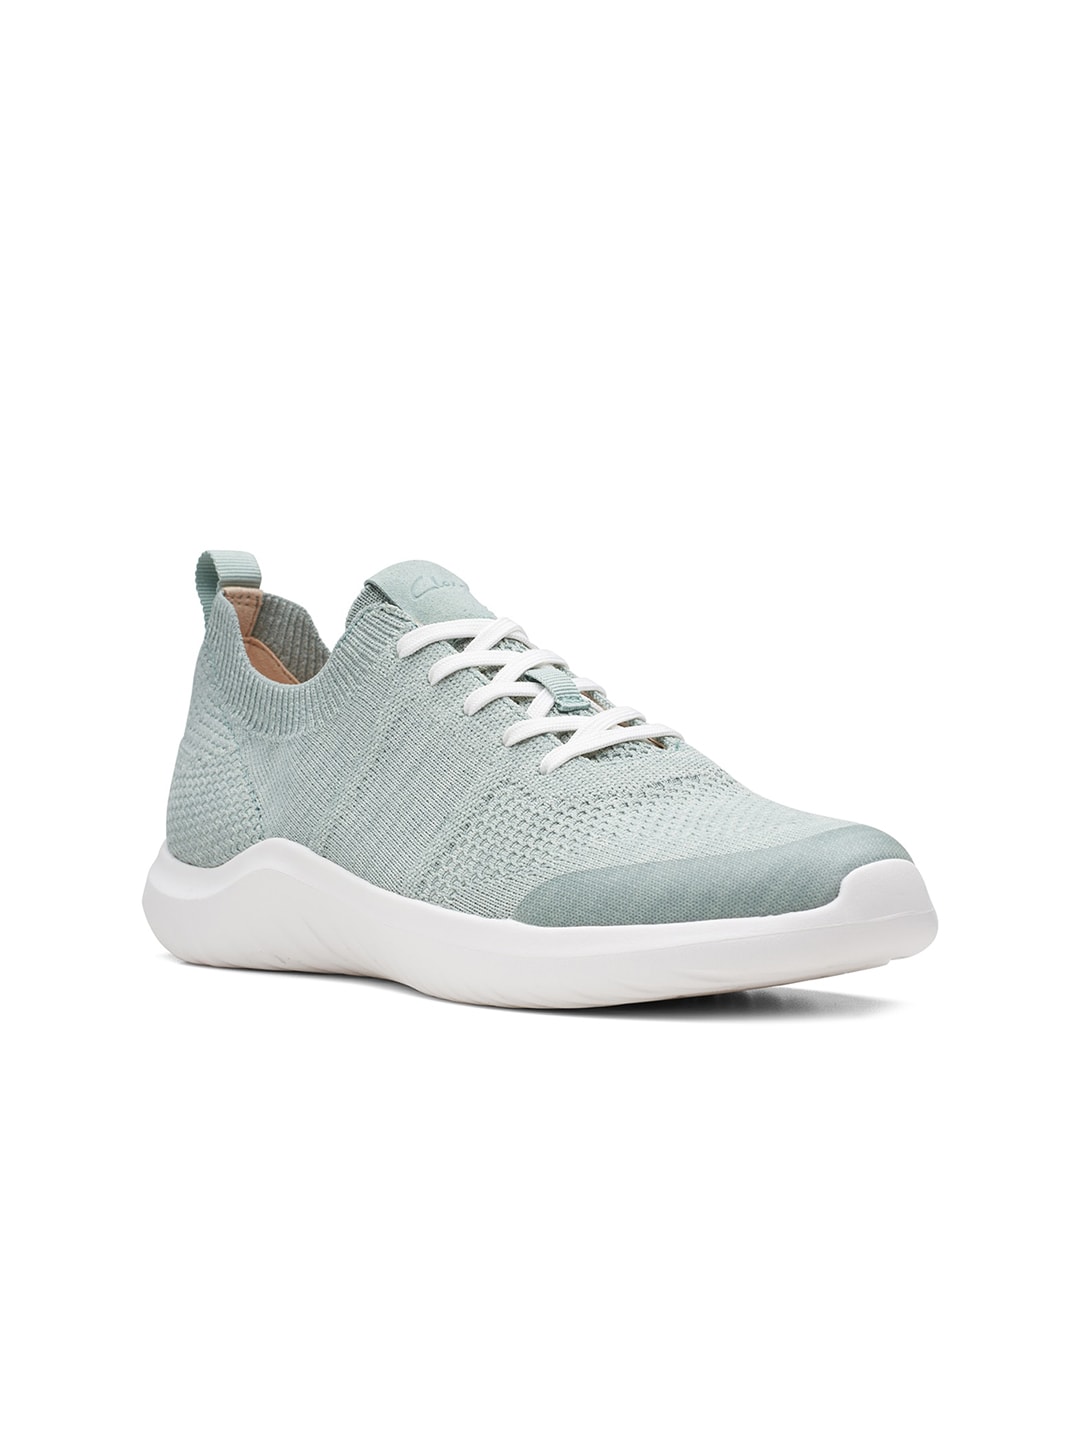 Clarks Women Woven Design Textile Lace-Ups Sneakers Price in India